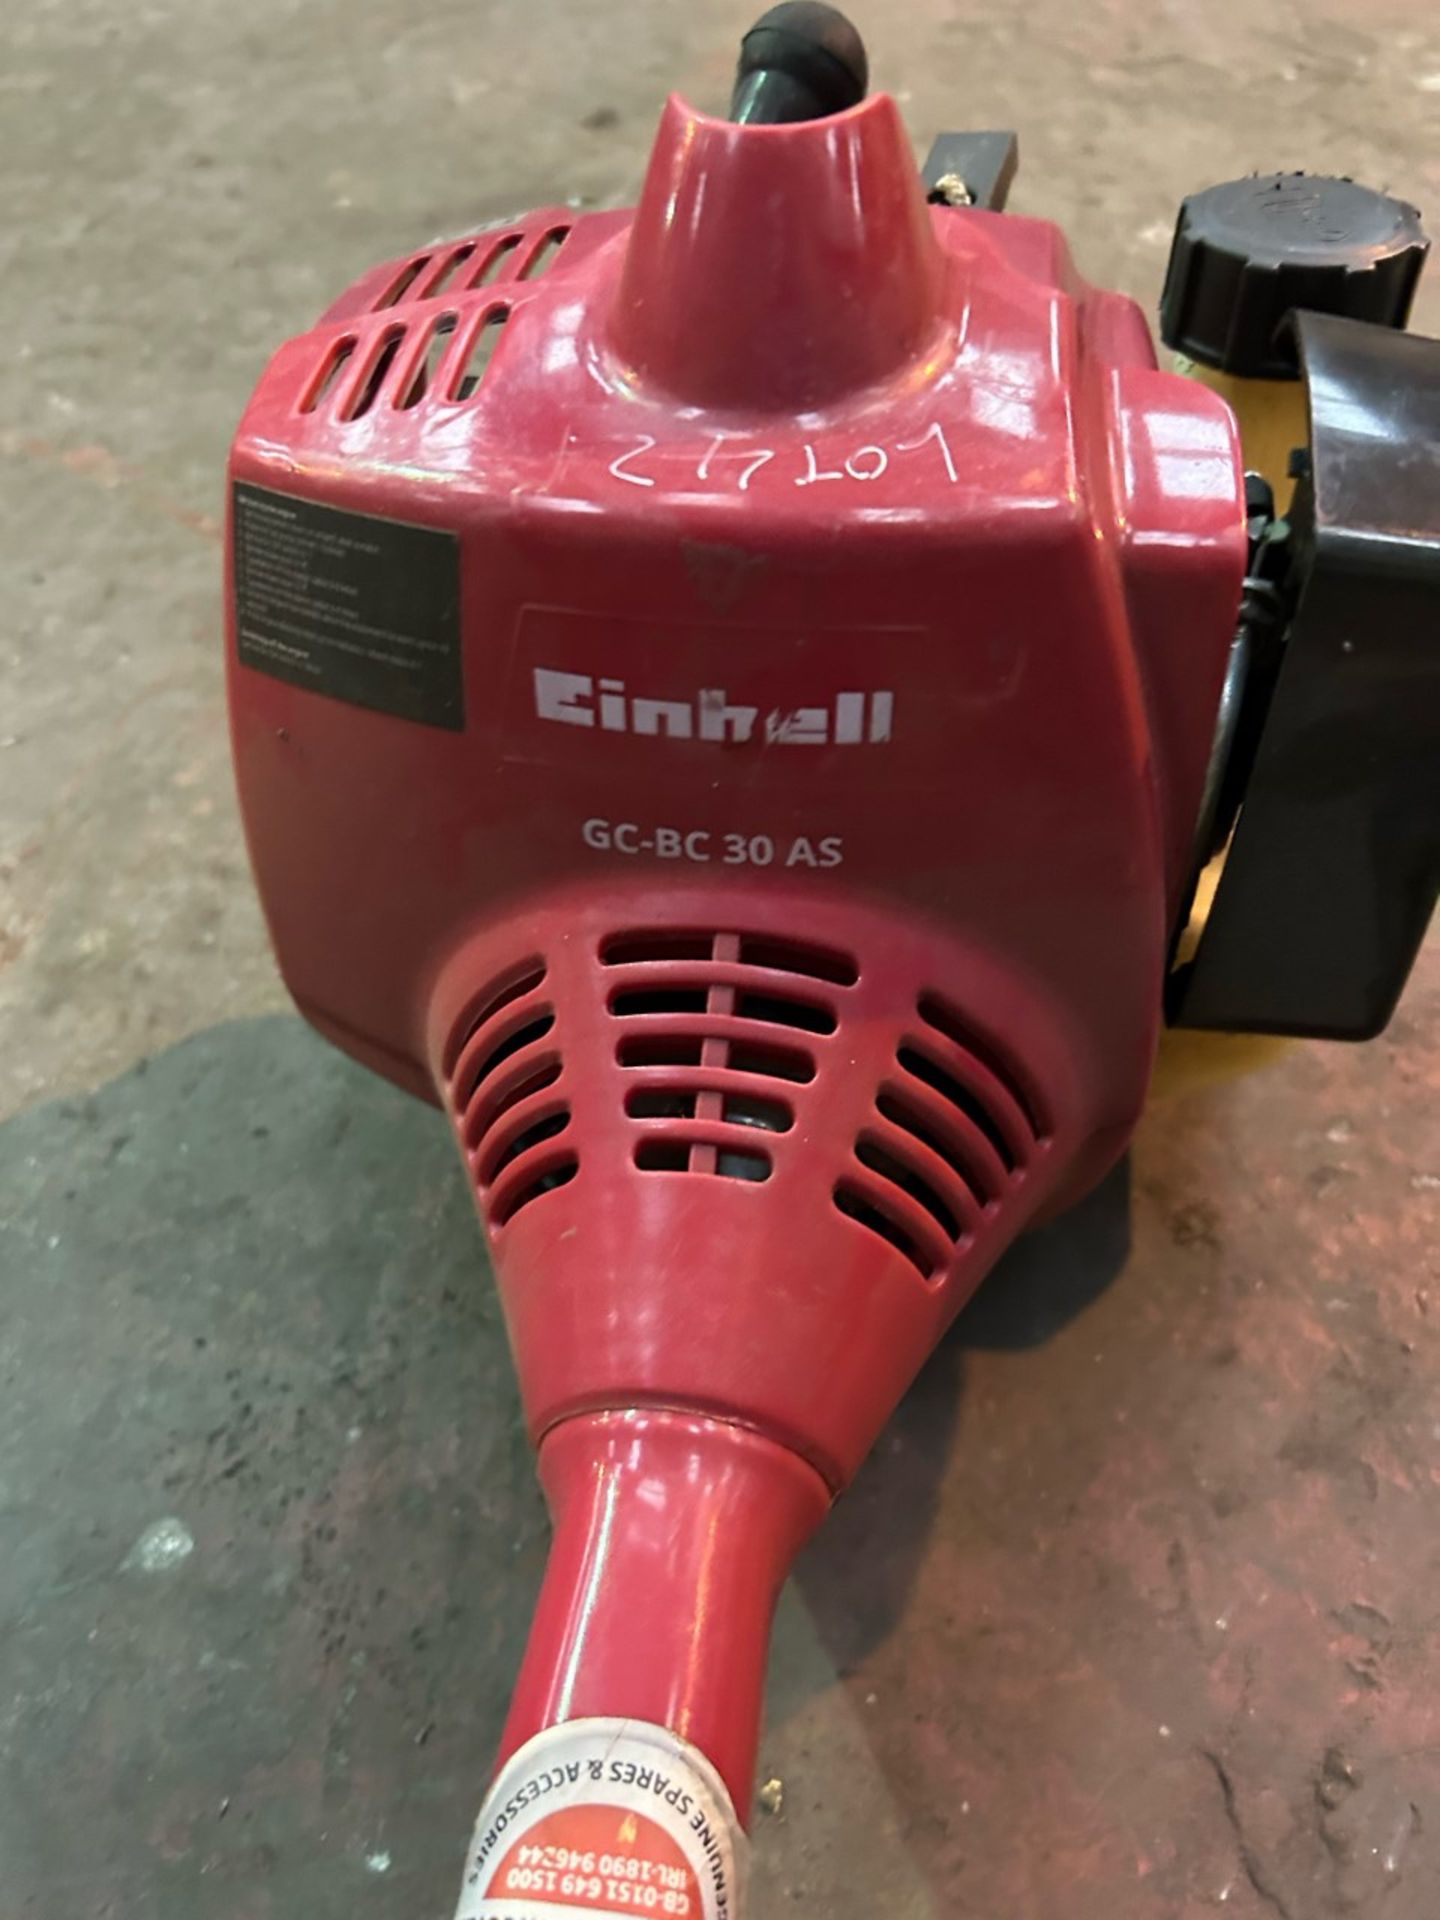 Einhell GC-BC 30 AS brushcutter strimmer. Split shaft so other attachments can be added to power - Image 3 of 3